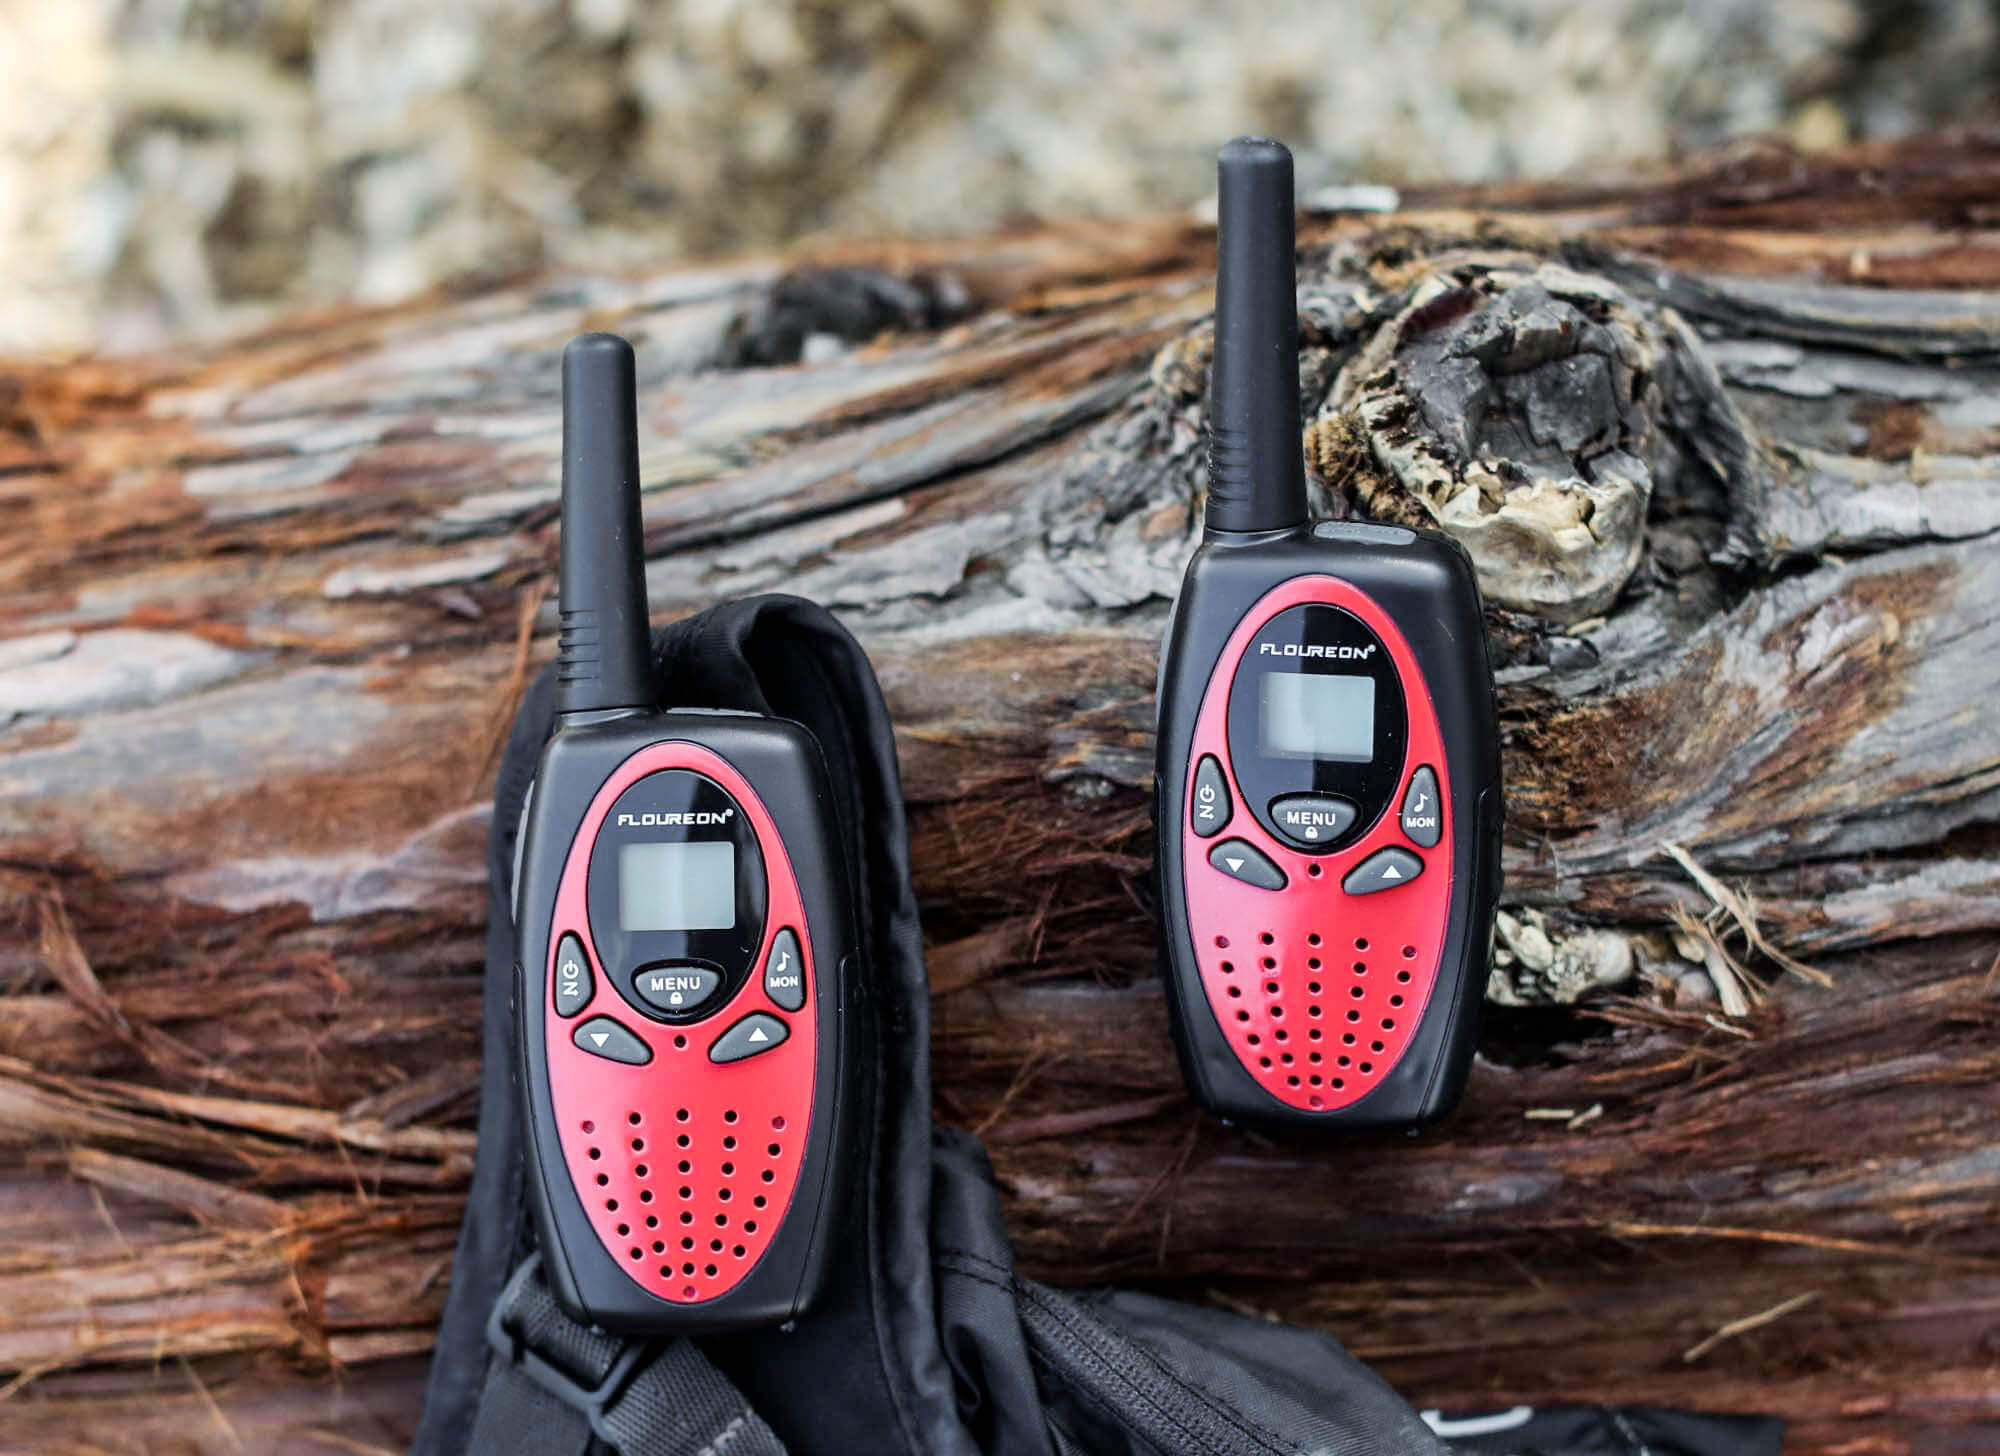 Upgrow Walkie Talkie Rechargeable Walkie Talkies Long Range 16CH Two Way Radio Handheld FM Transceiver for Adult Field Survival Camping Hiking Communication 1 Pair-1